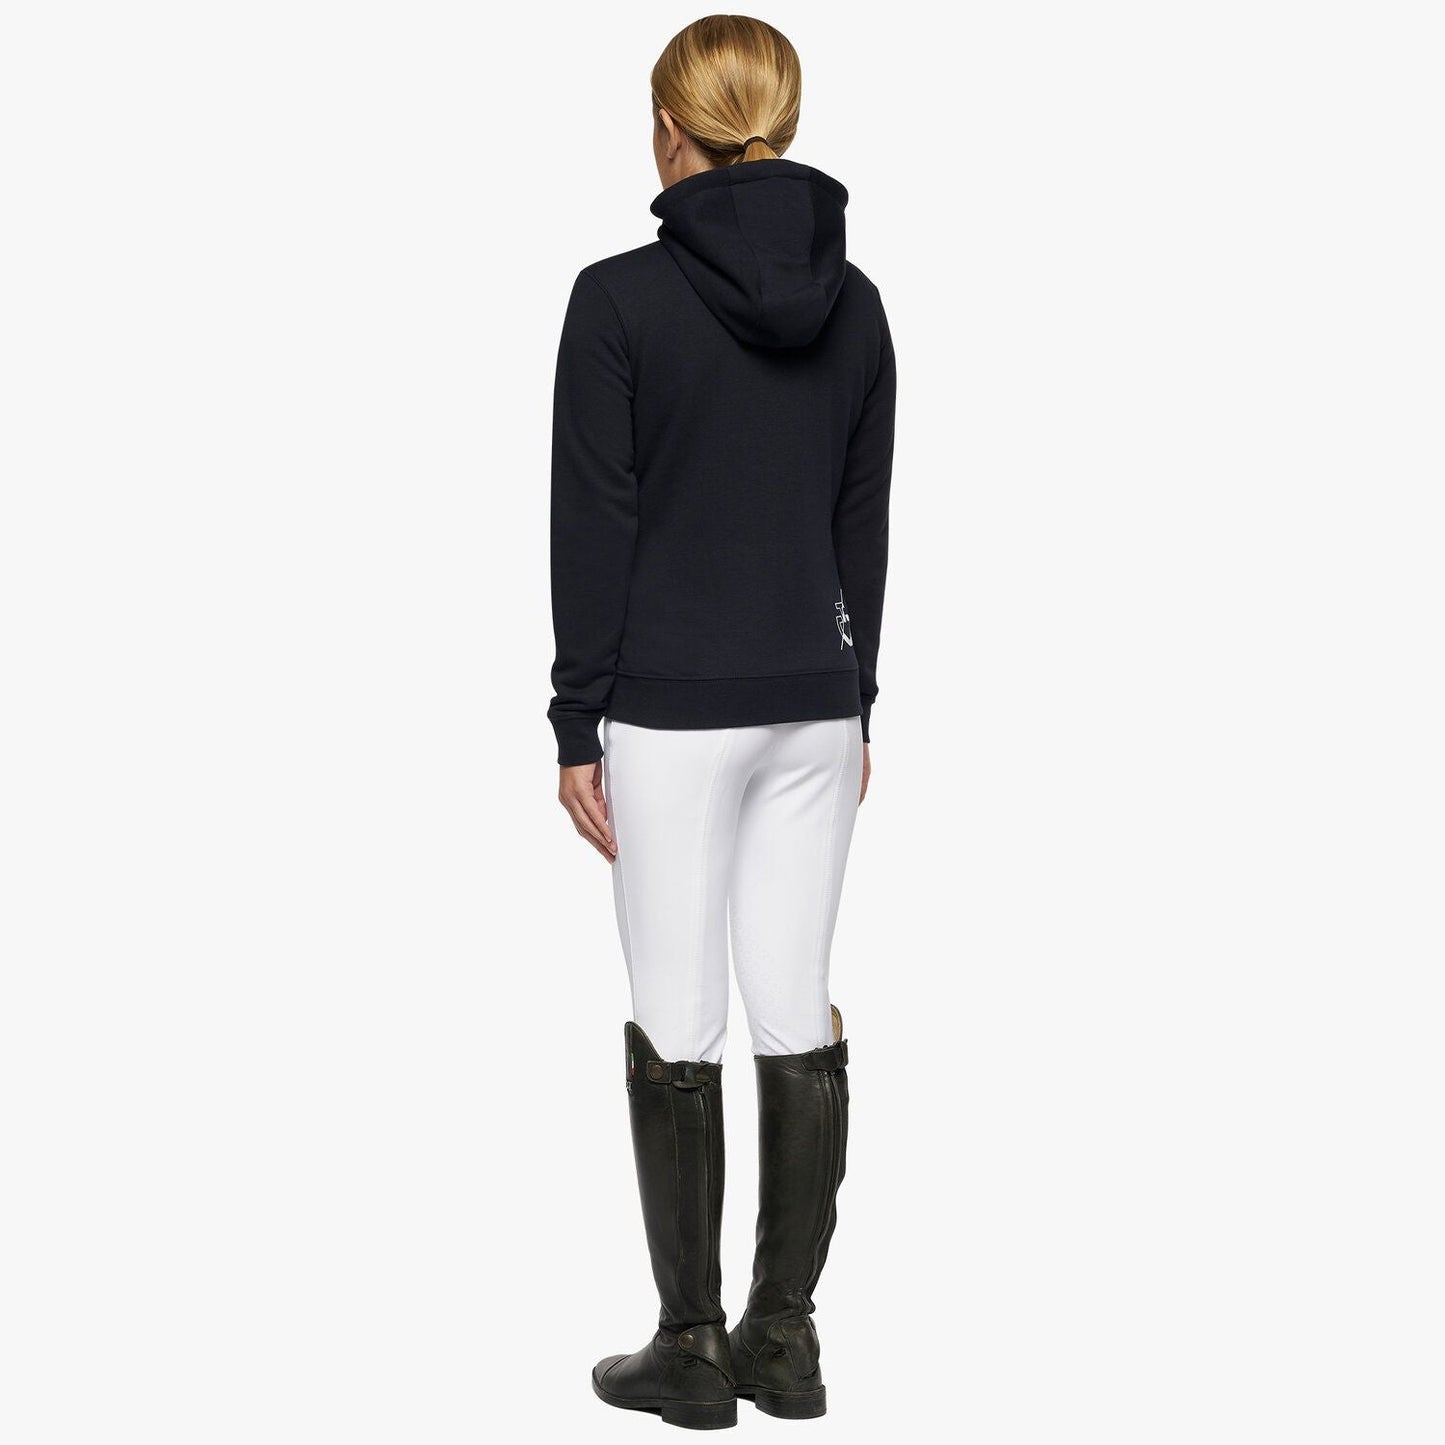 Cavalleria Toscana CT Team Daytona Hoodie - Girls-Trailrace Equestrian Outfitters-The Equestrian